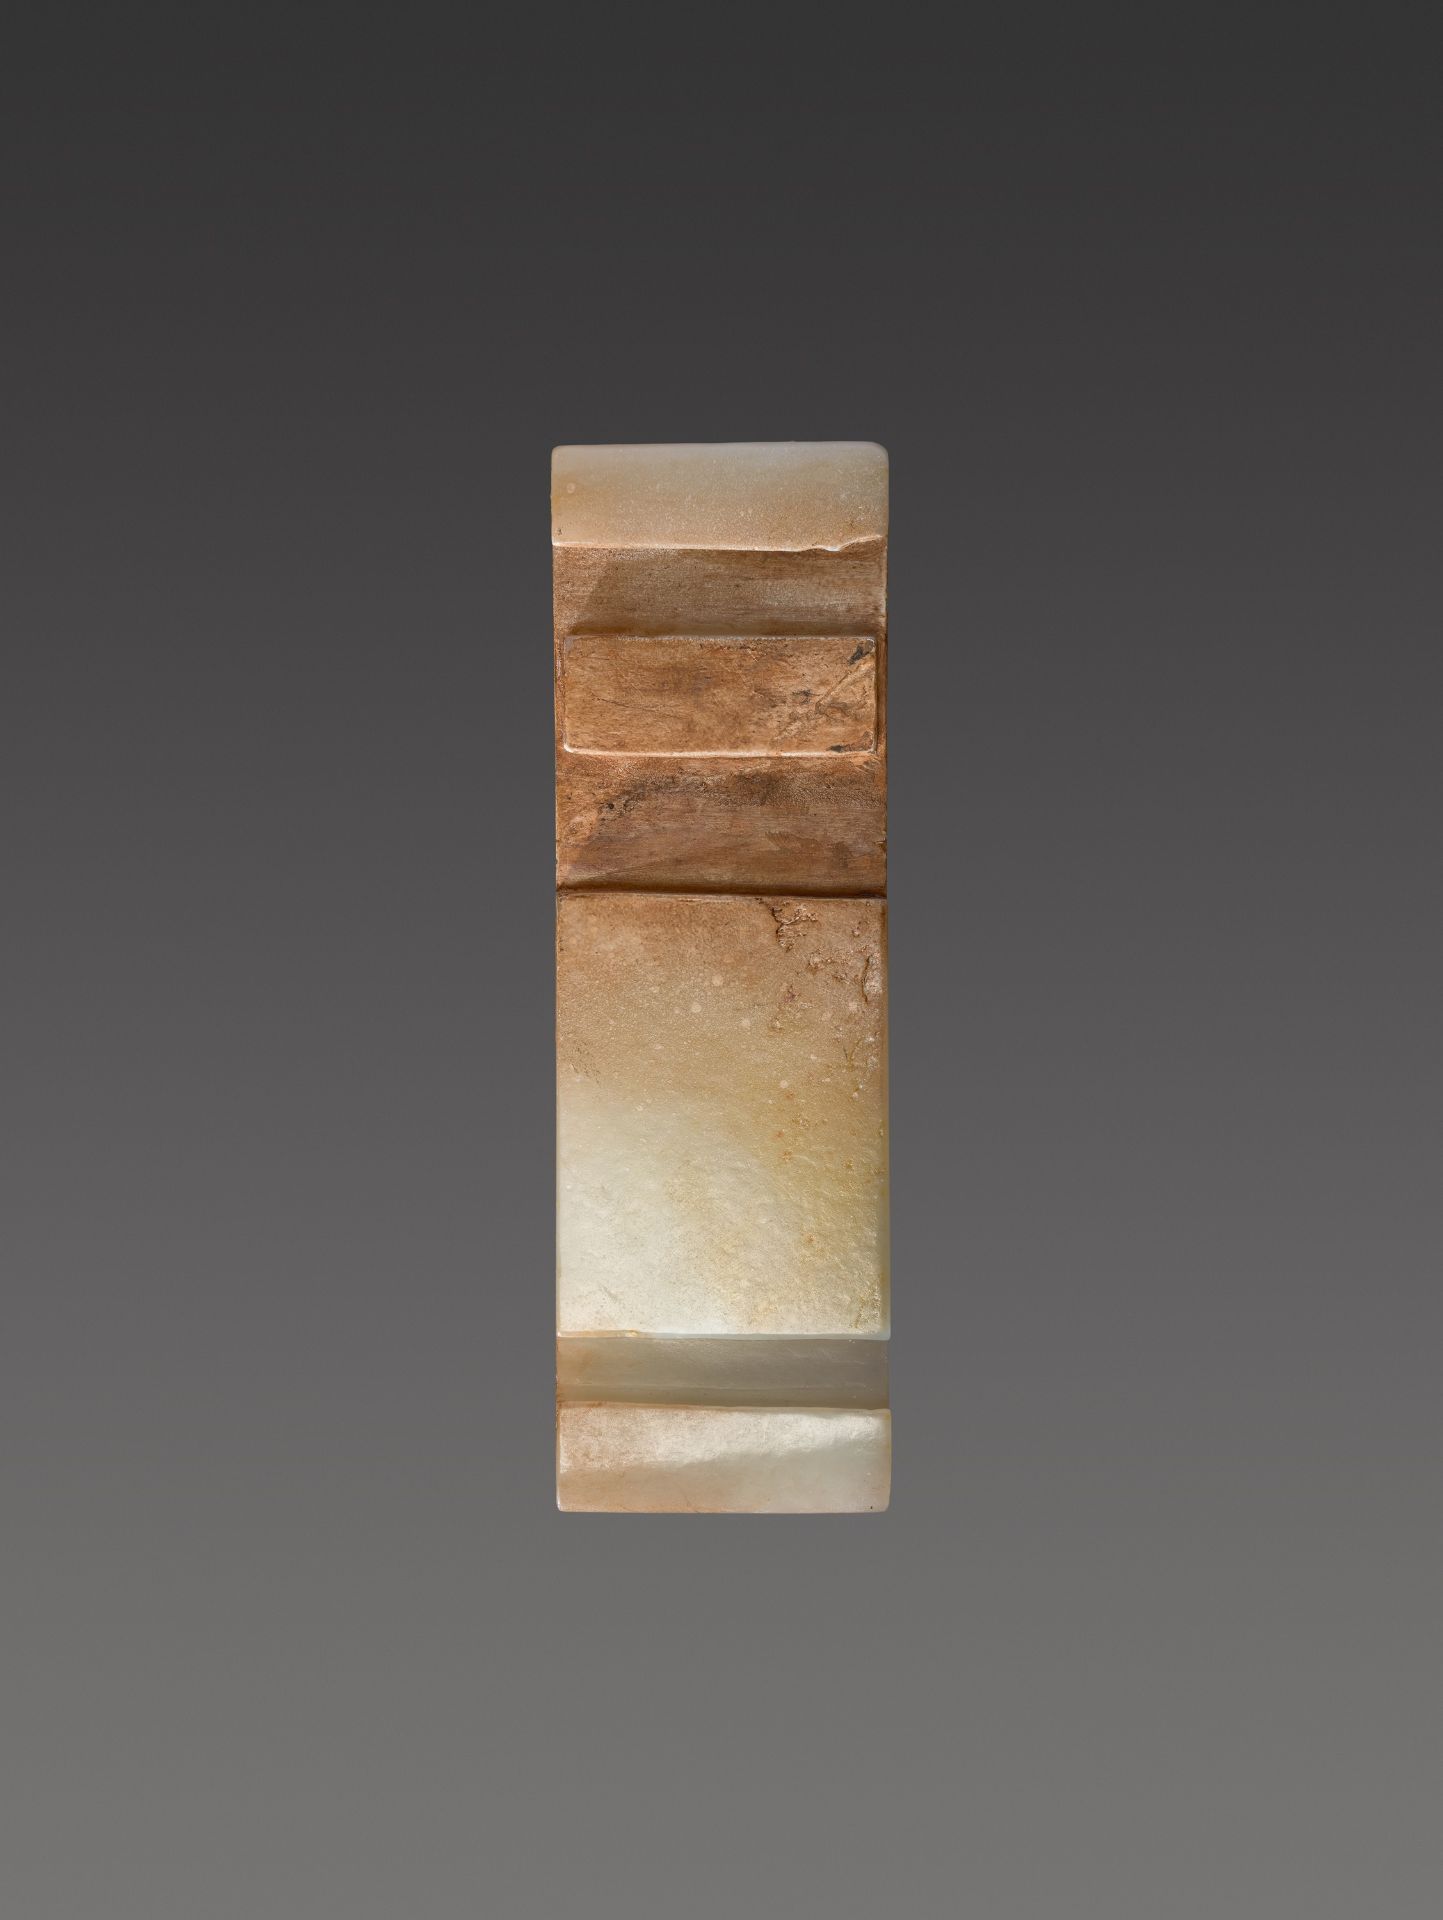 AN ARCHAISTIC PALE CELADON JADE SCABBARD SLIDE, QING - Image 6 of 6